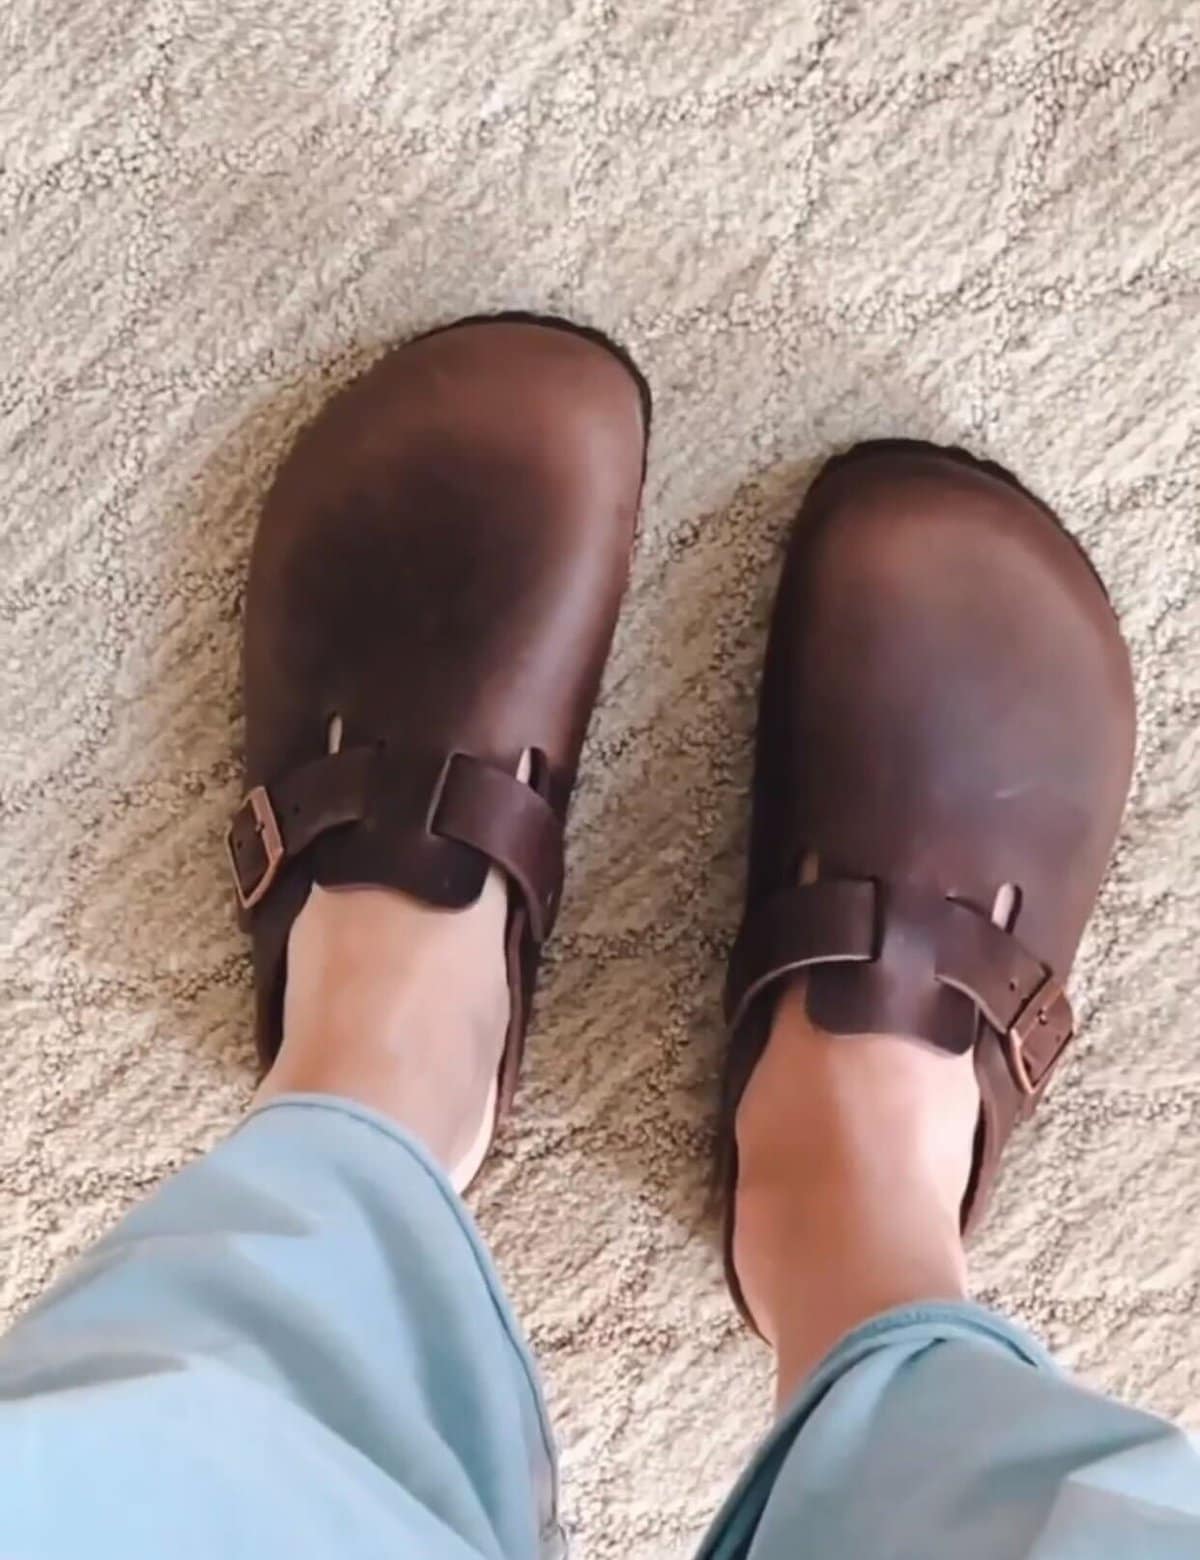 Everything you need to know about: Birkenstock